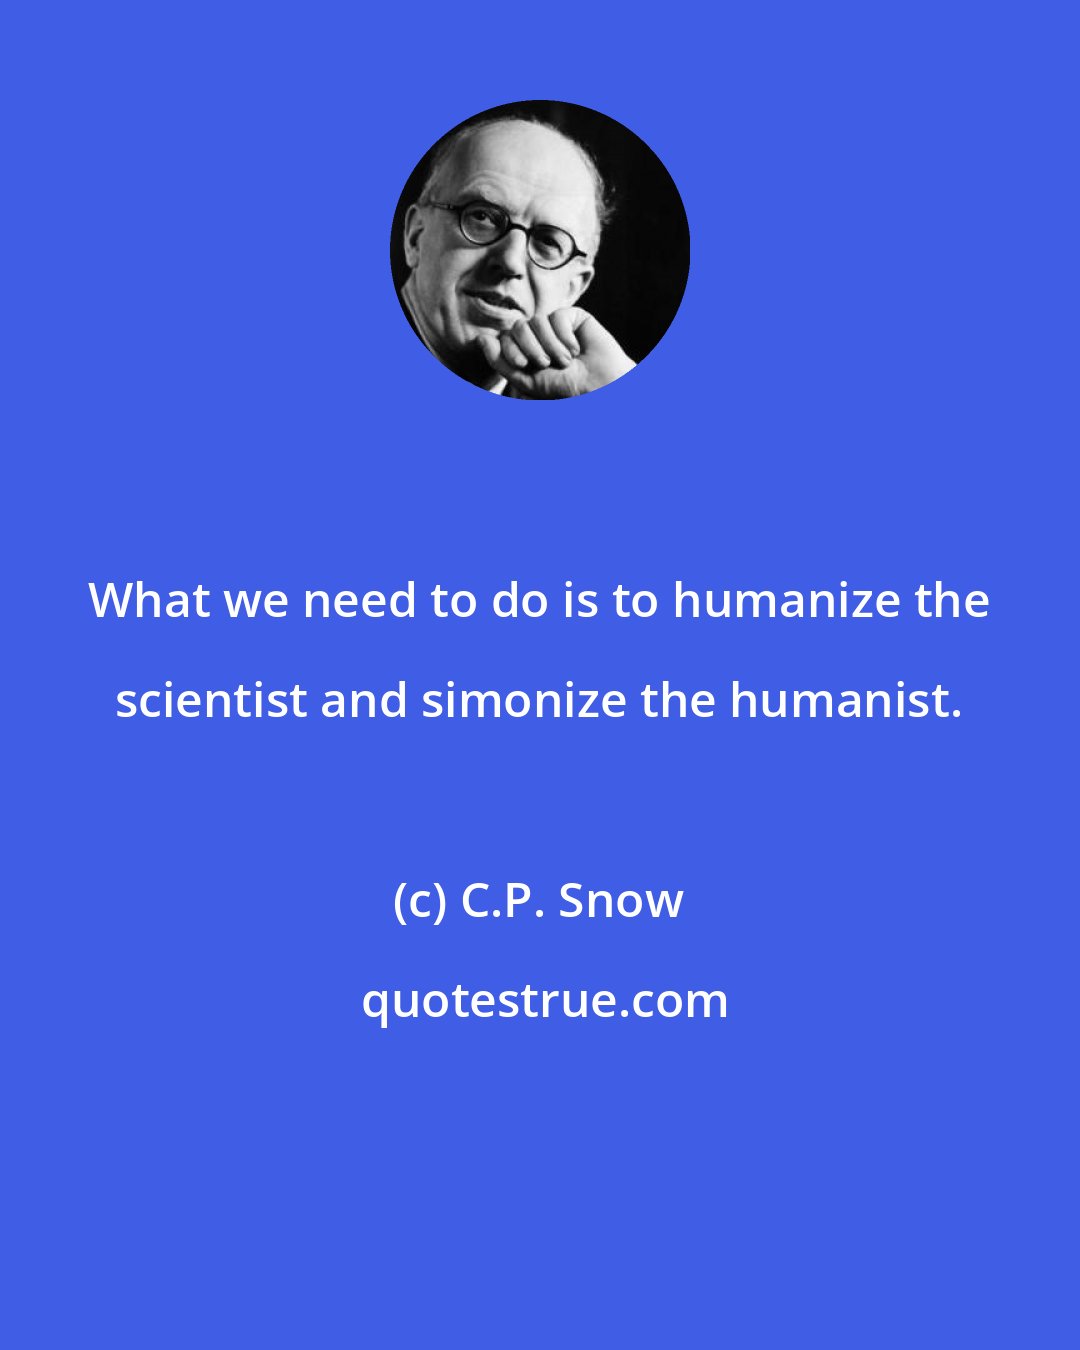 C.P. Snow: What we need to do is to humanize the scientist and simonize the humanist.